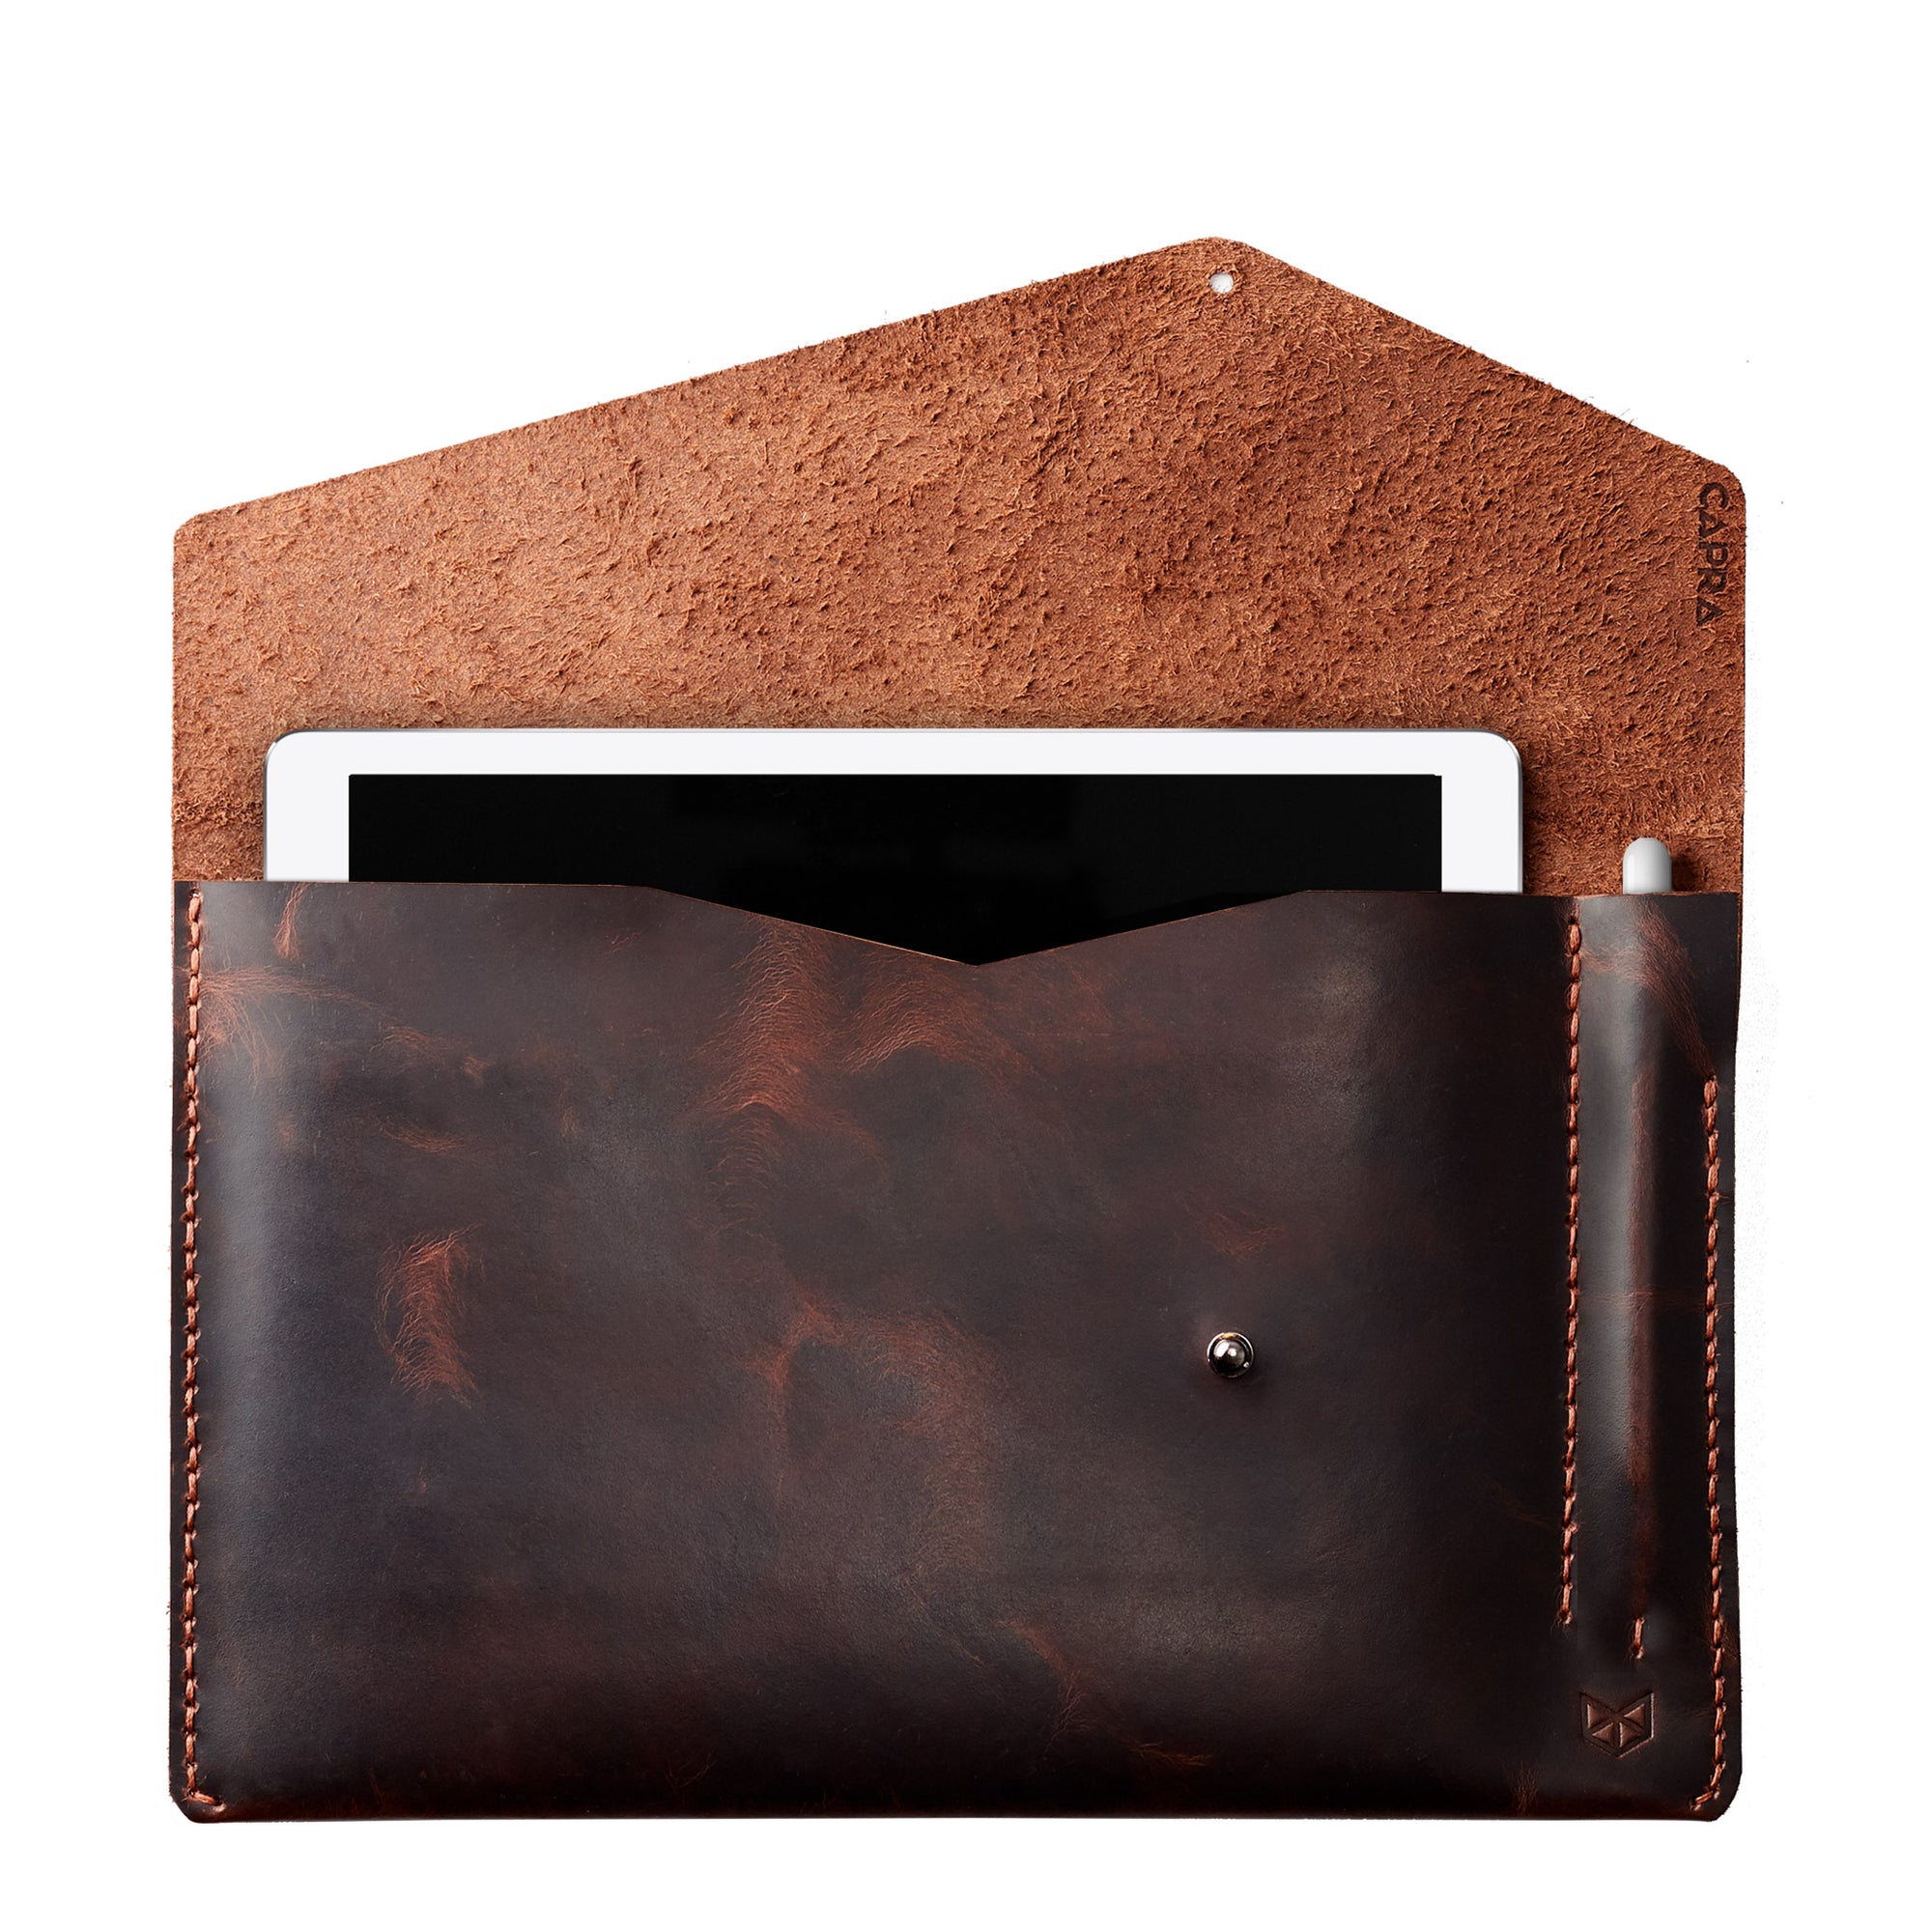 Red brown leather sleeve for iPad pro 10.5 inch 12.9 inch. Mens gifts